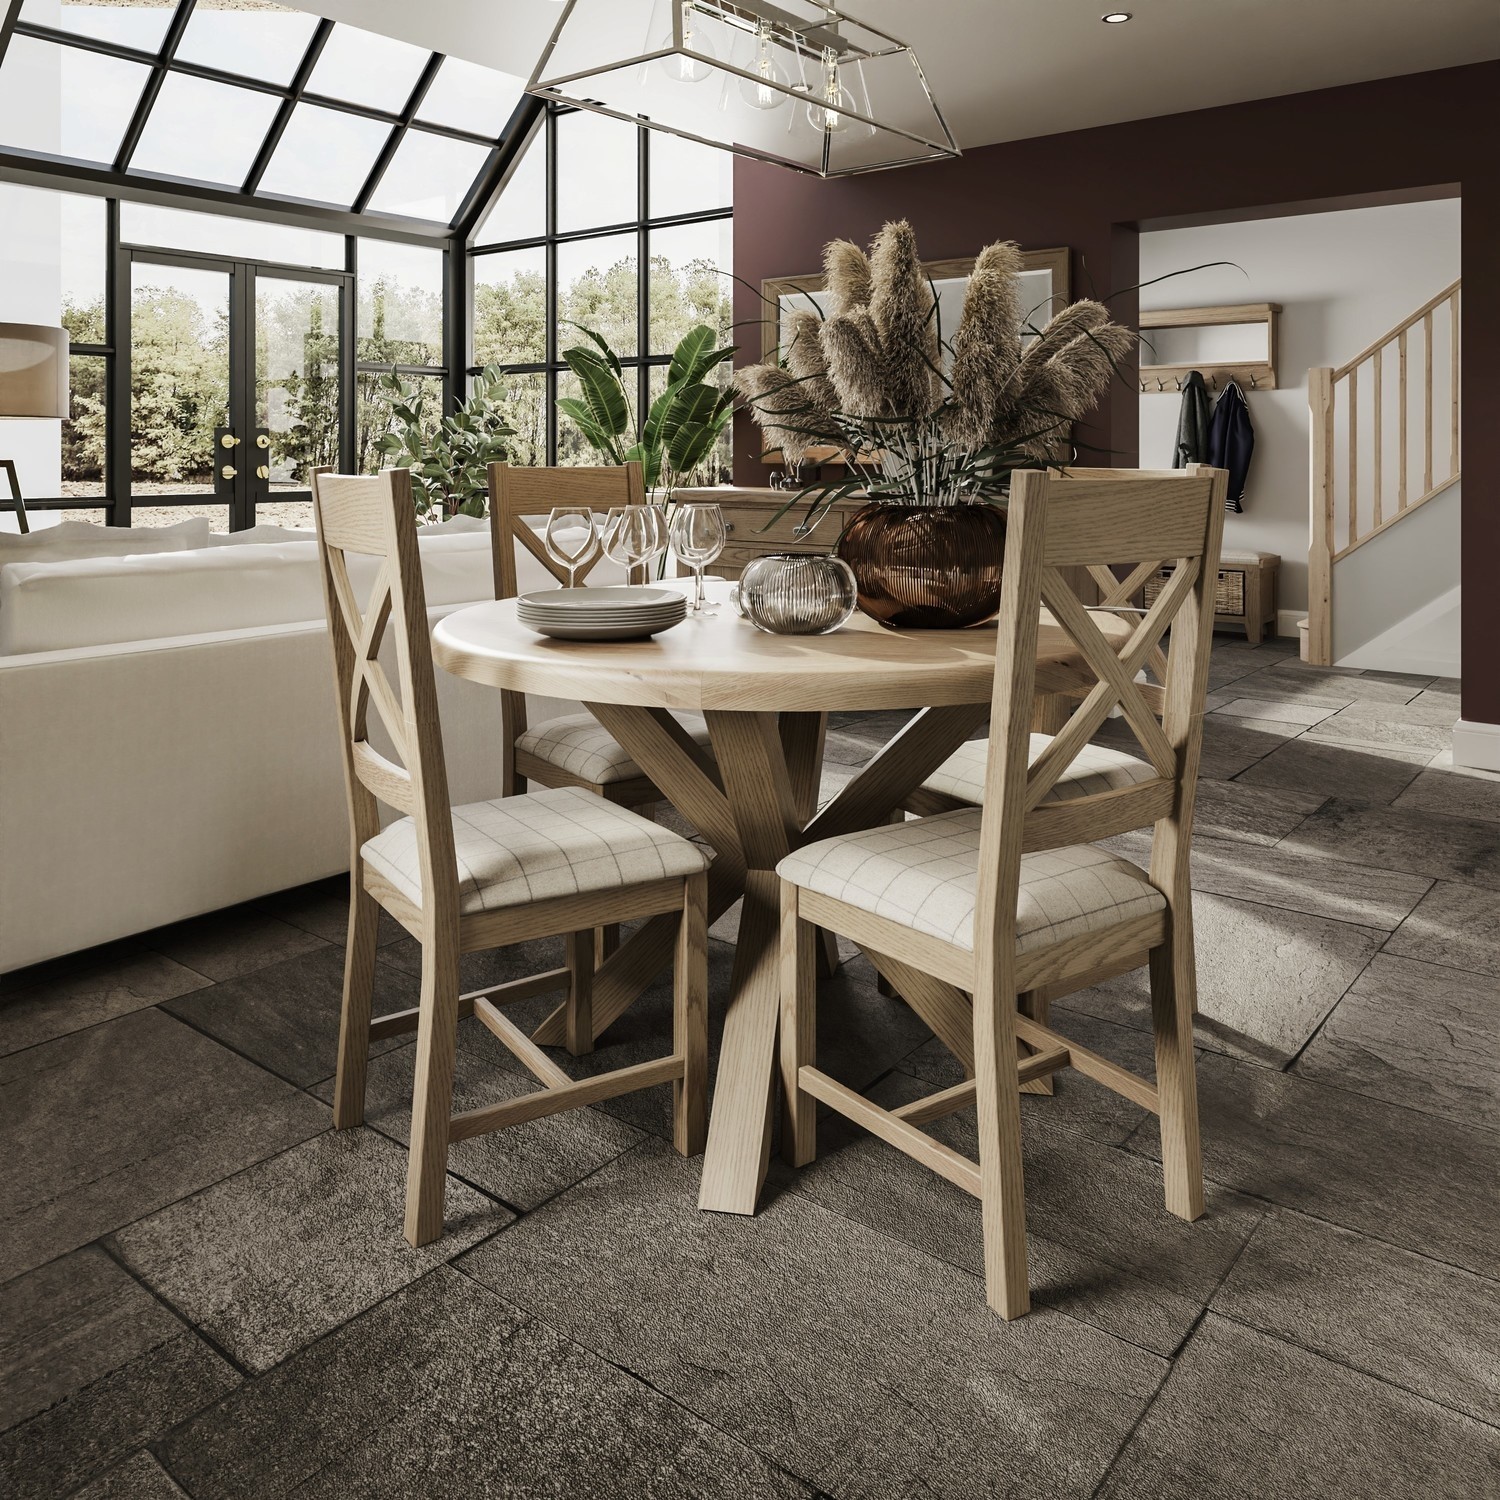 Read more about Smoked oak small round dining table 120cm